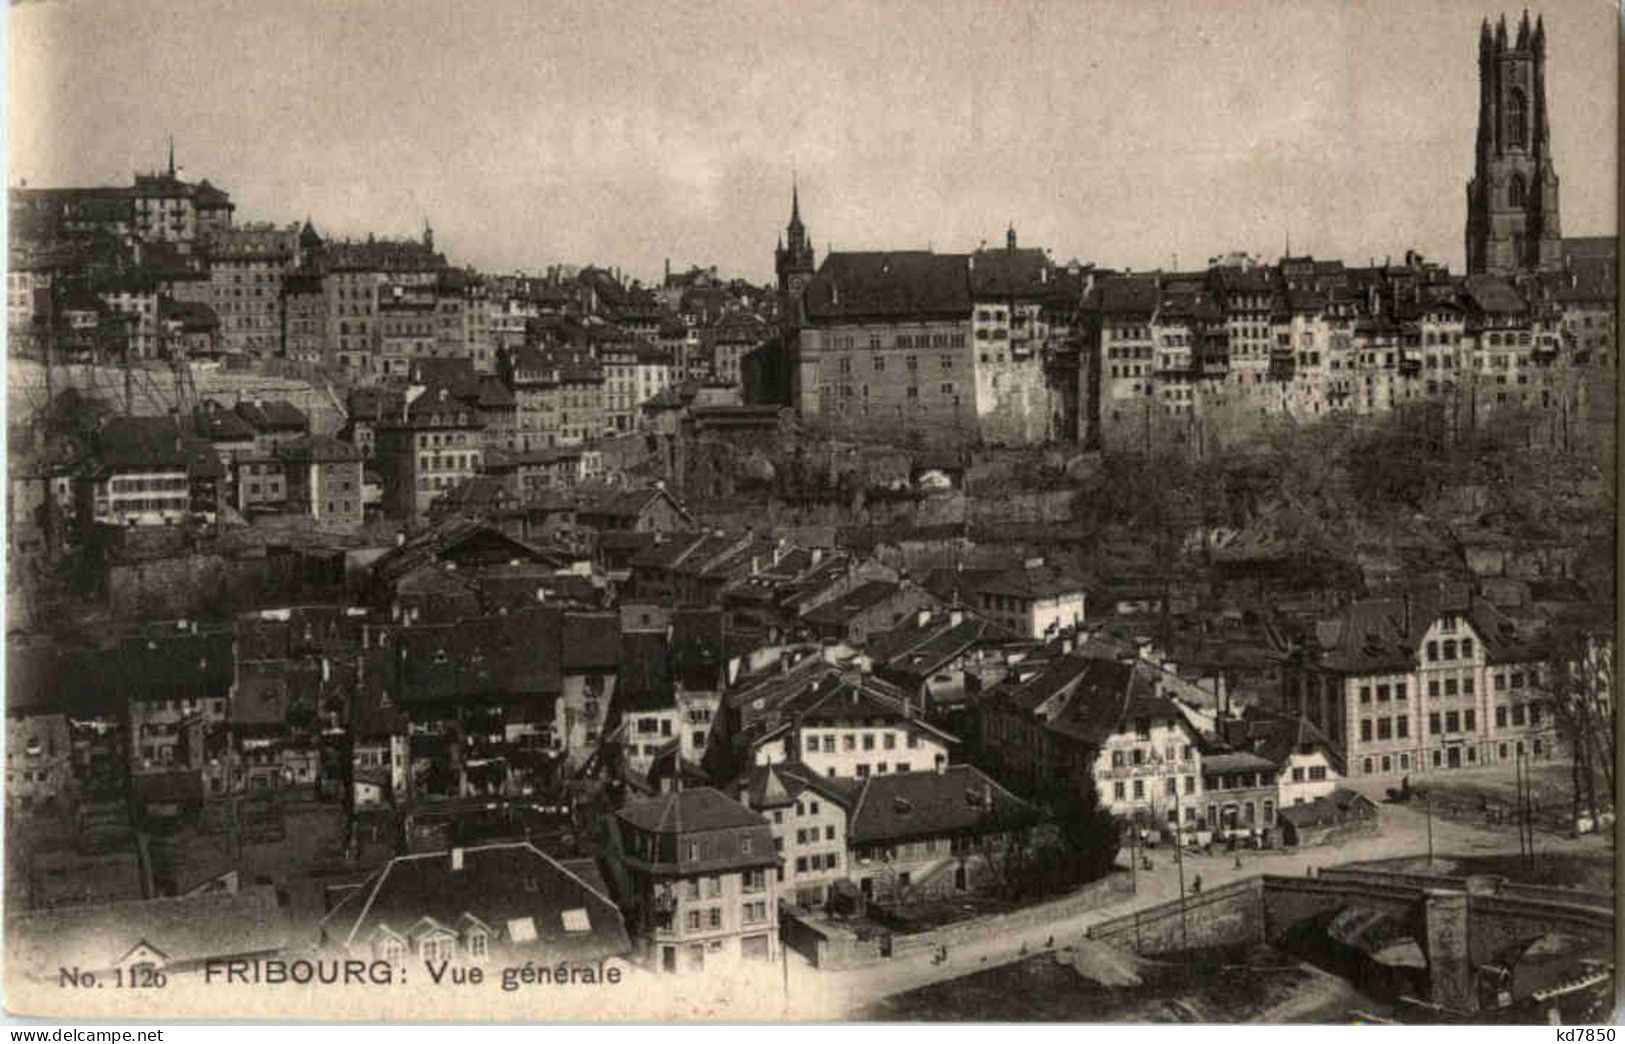 Fribourg - Fribourg